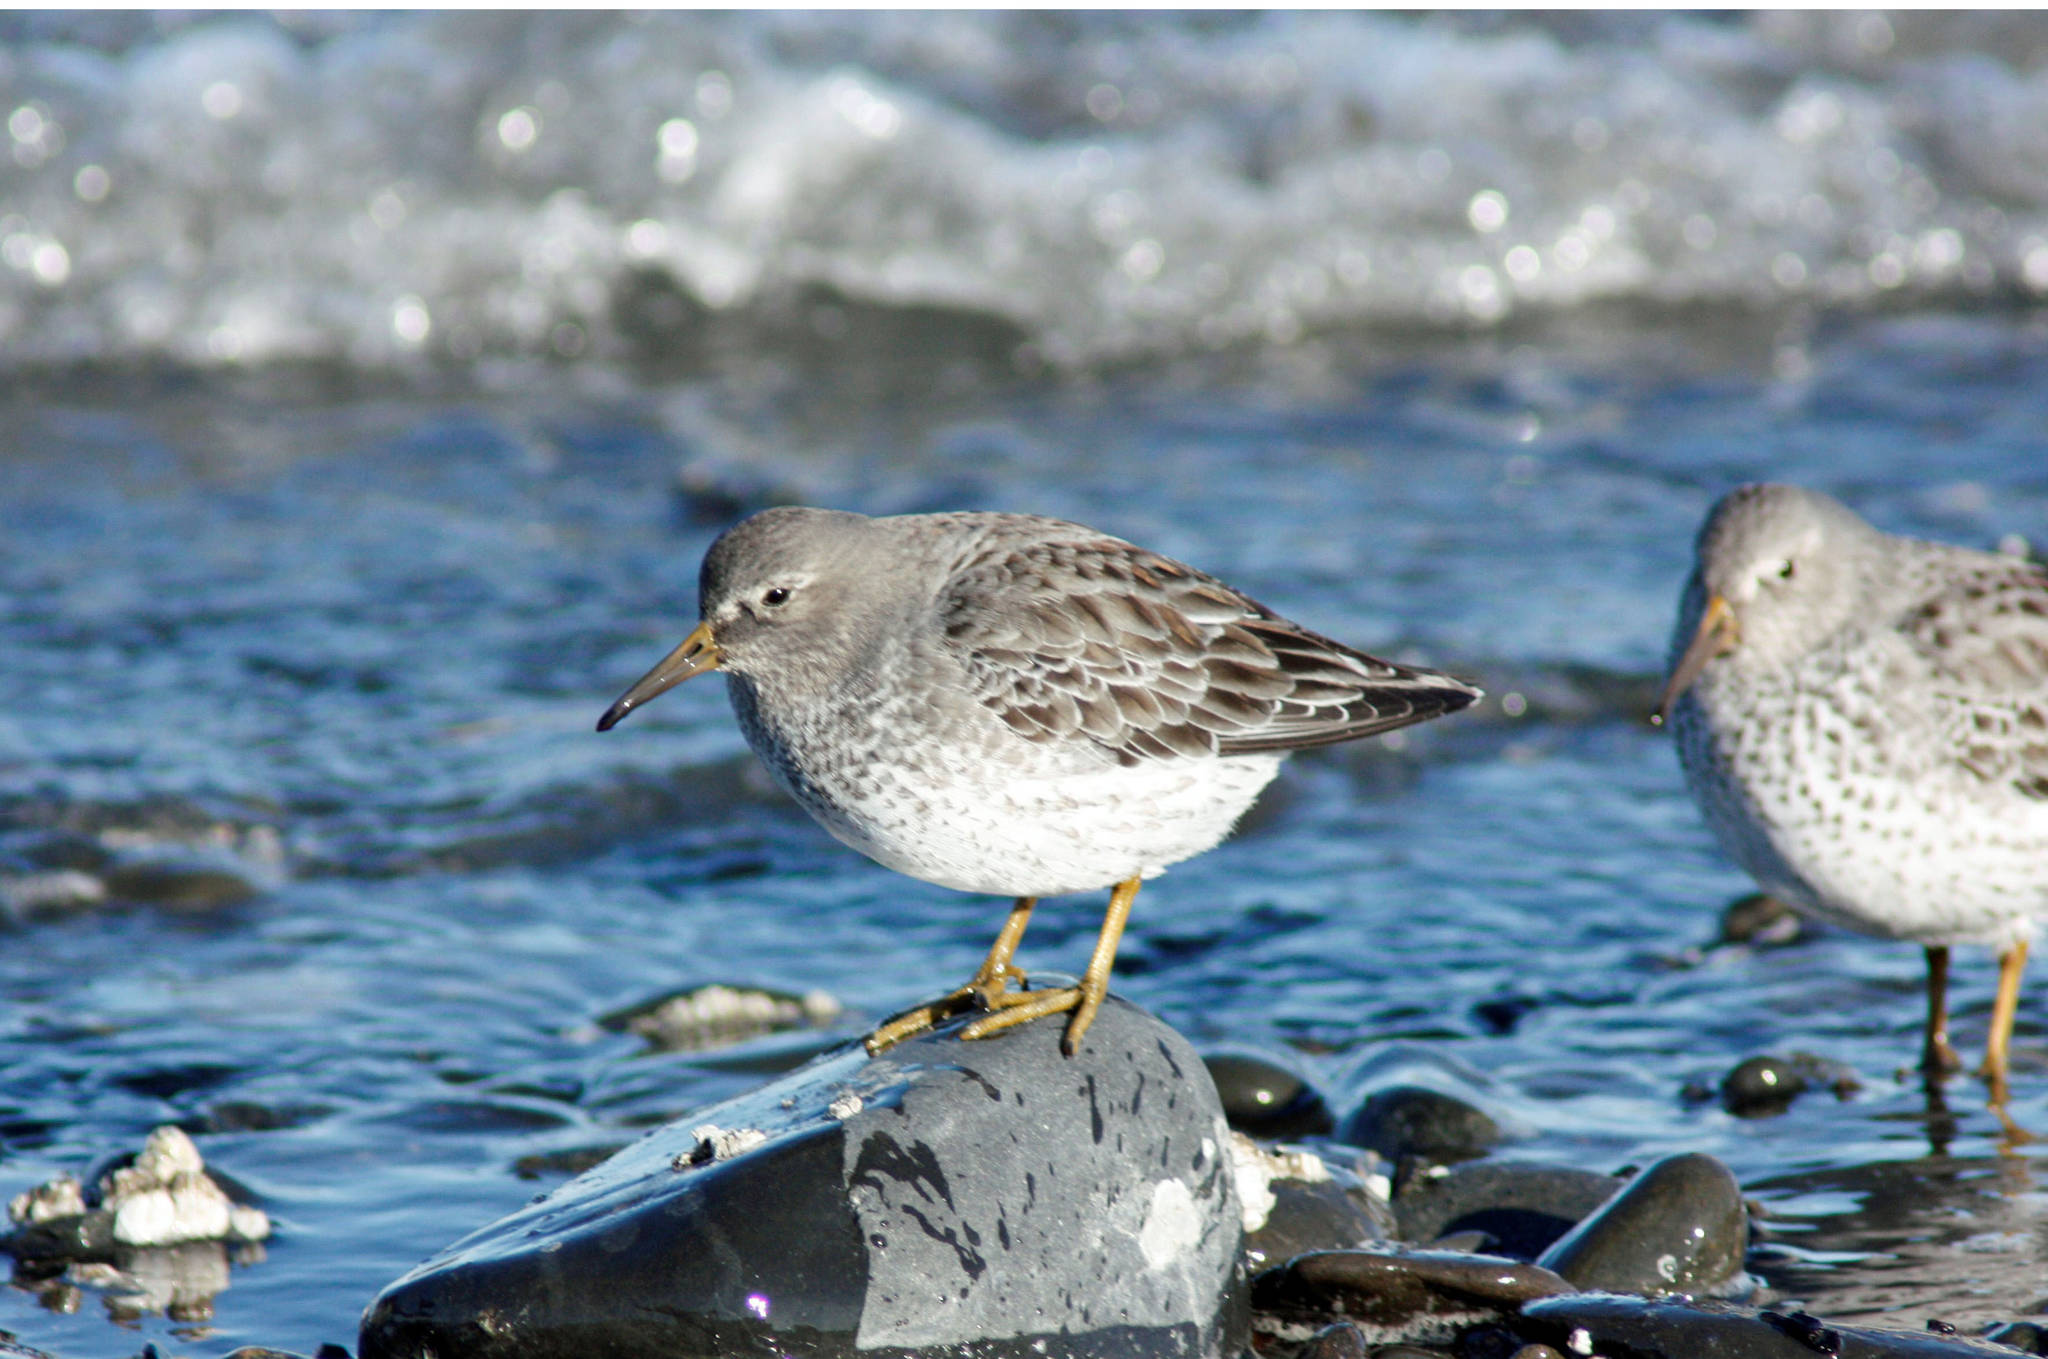 A rock sandpiper forages among ice on the Homer Spit in February 2012 in Homer, Alaska (Photo by George Matz)